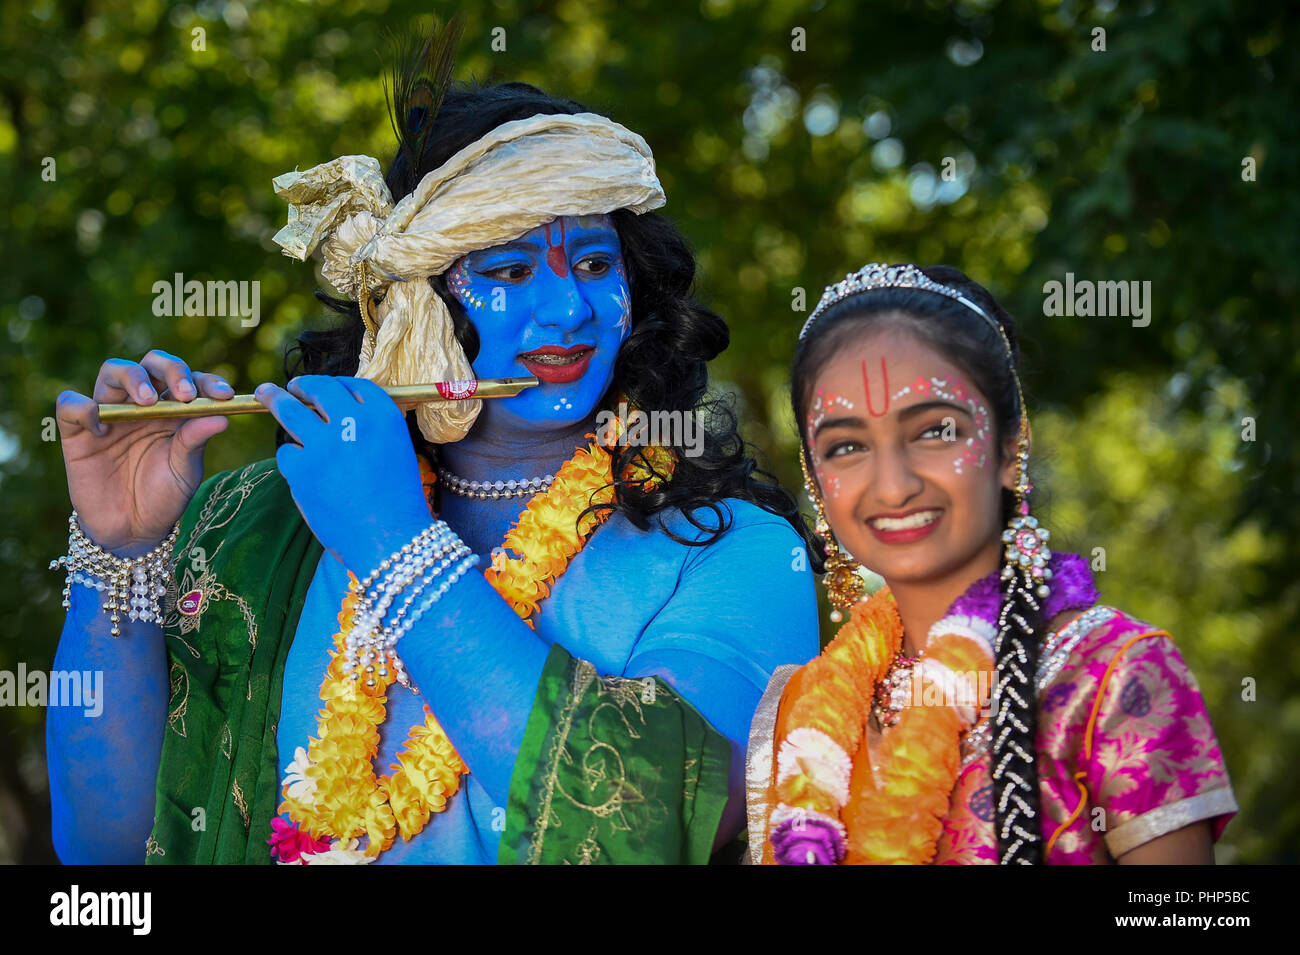 Watford, UK. 2 September 2018. (L to R) Kushal and Shivanee, students at Avanti School in Stanmore, dress as Lord Krishna and his consort Radharani, as thousands of devotees attend the biggest Janmashtami festival outside of India at the Bhaktivedanta Manor Hare Krishna Temple in Watford, Hertfordshire.  The event celebrates the birth of Lord Krishna and take place at a property donated to the Hare Krishna movement by ex Beatle George Harrison.  Credit: Stephen Chung / Alamy Live News Stock Photo